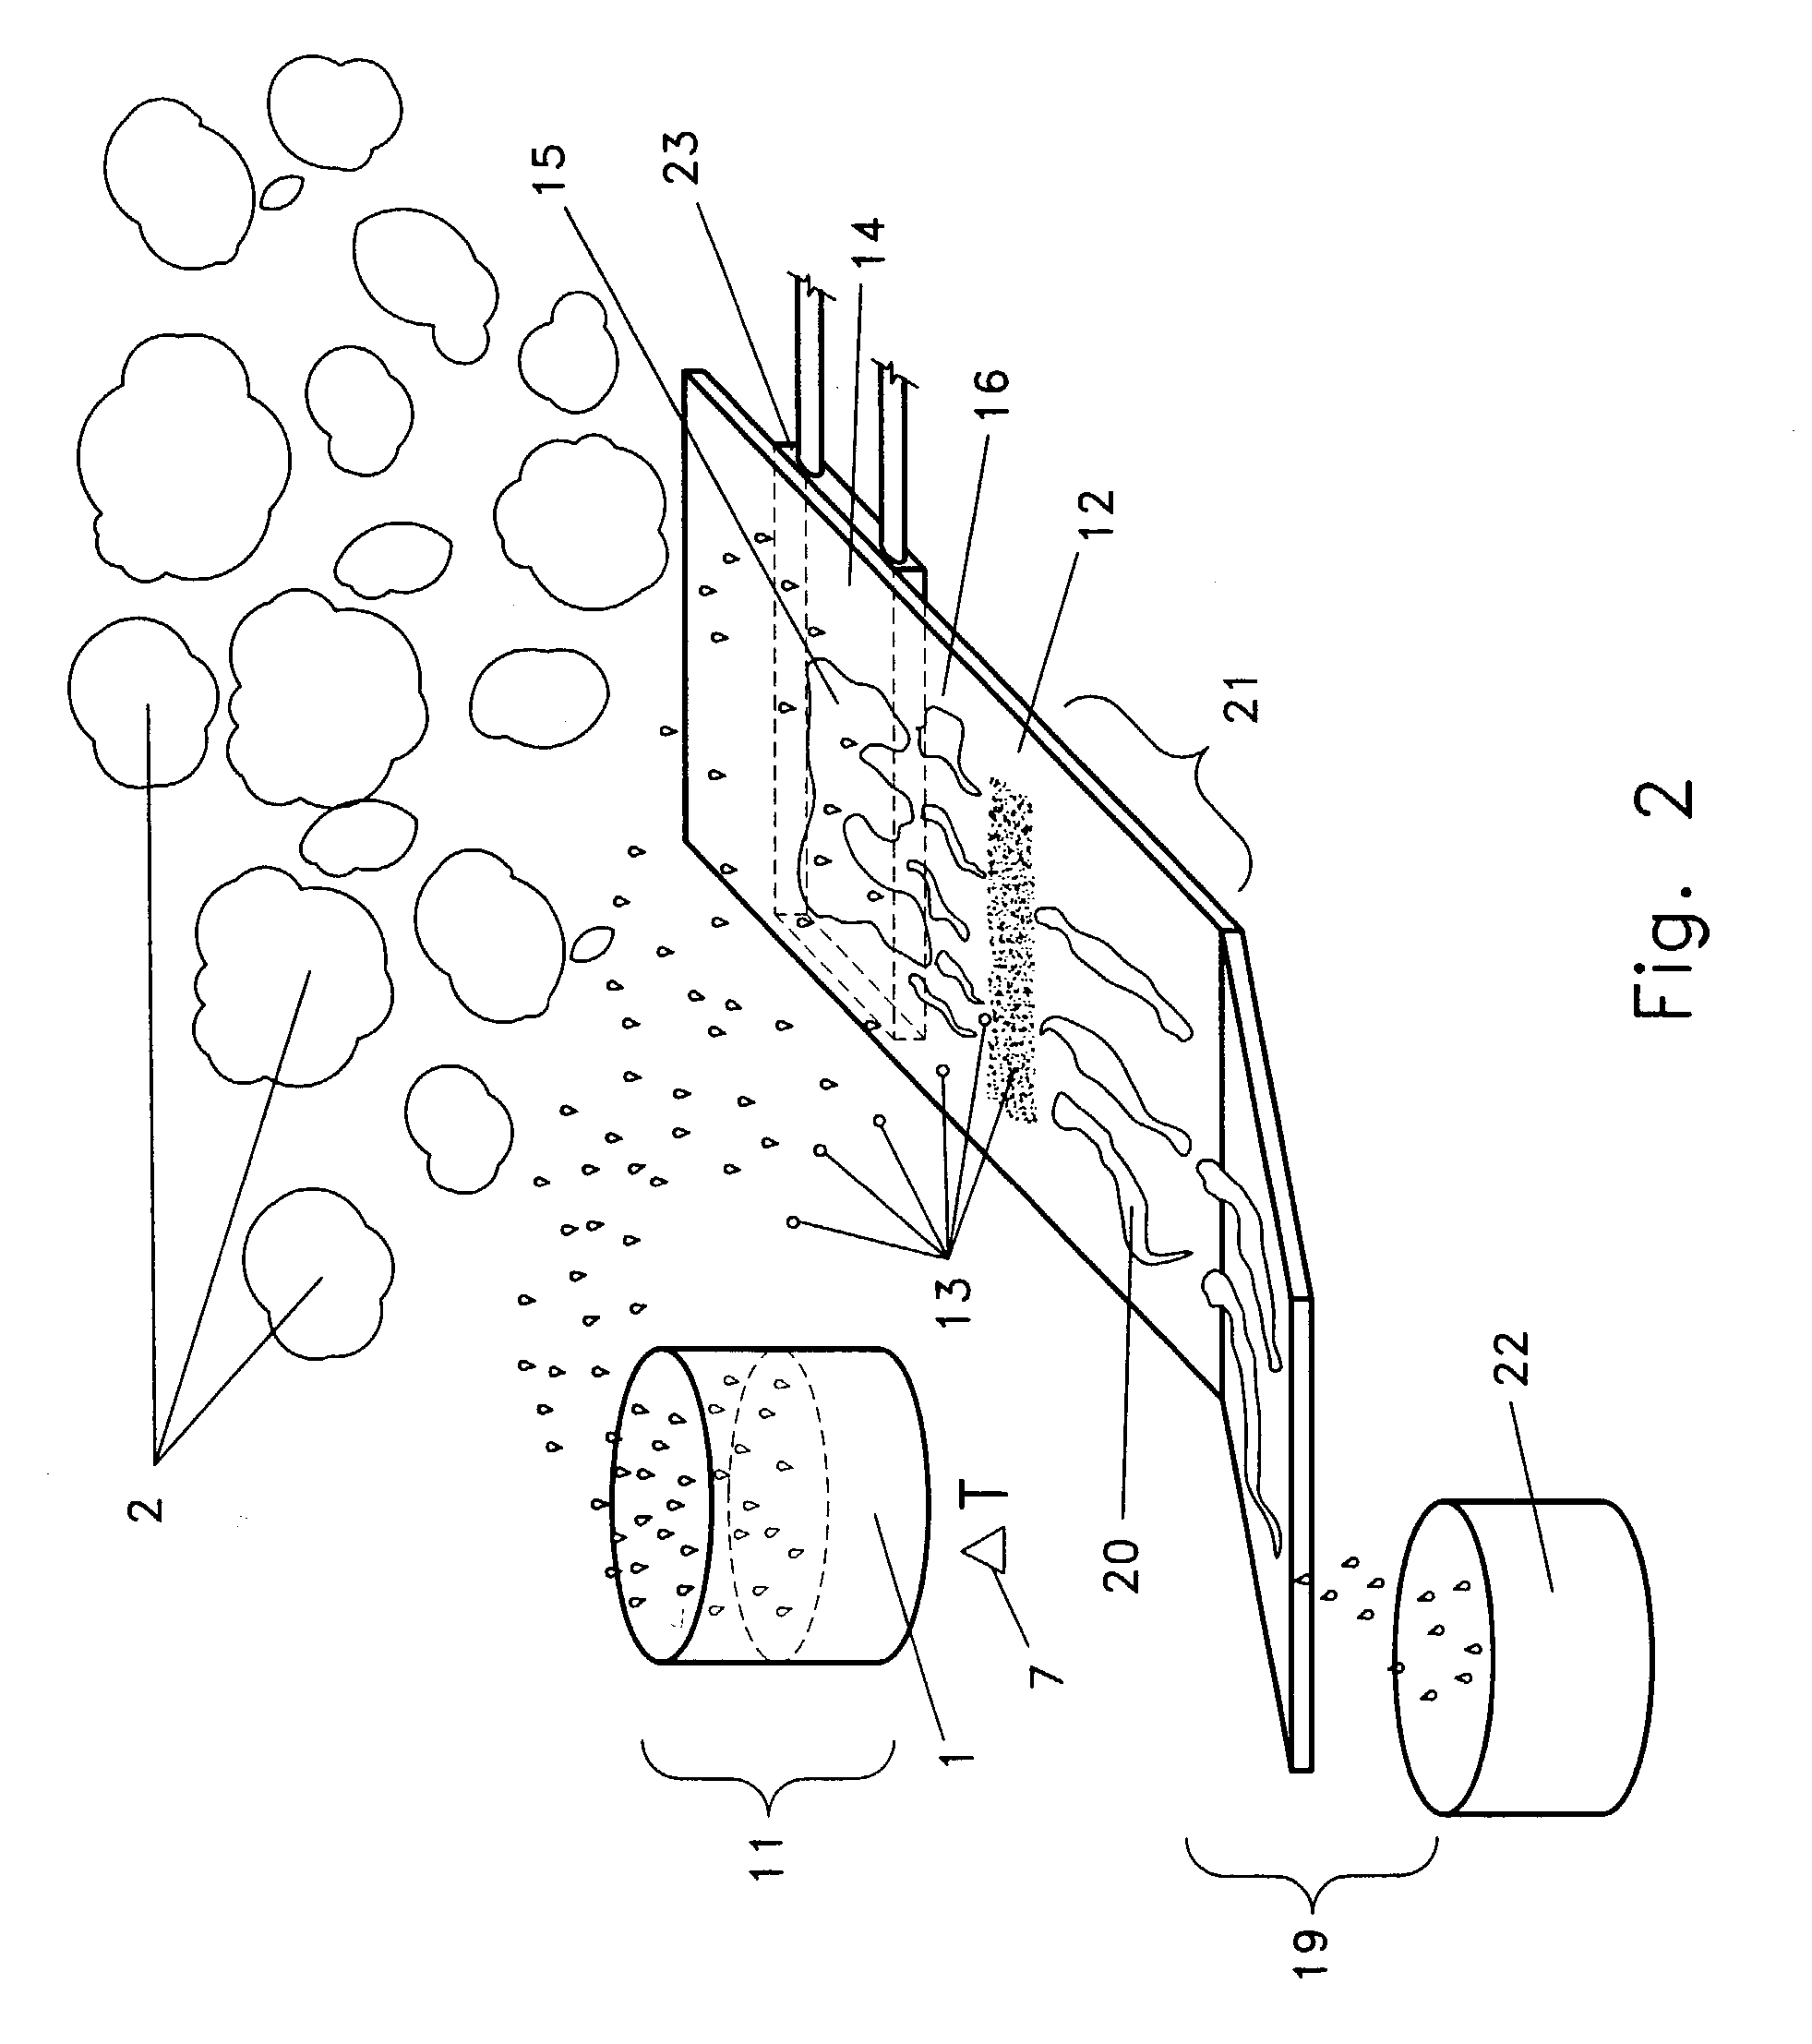 Accelarated water evaporation system